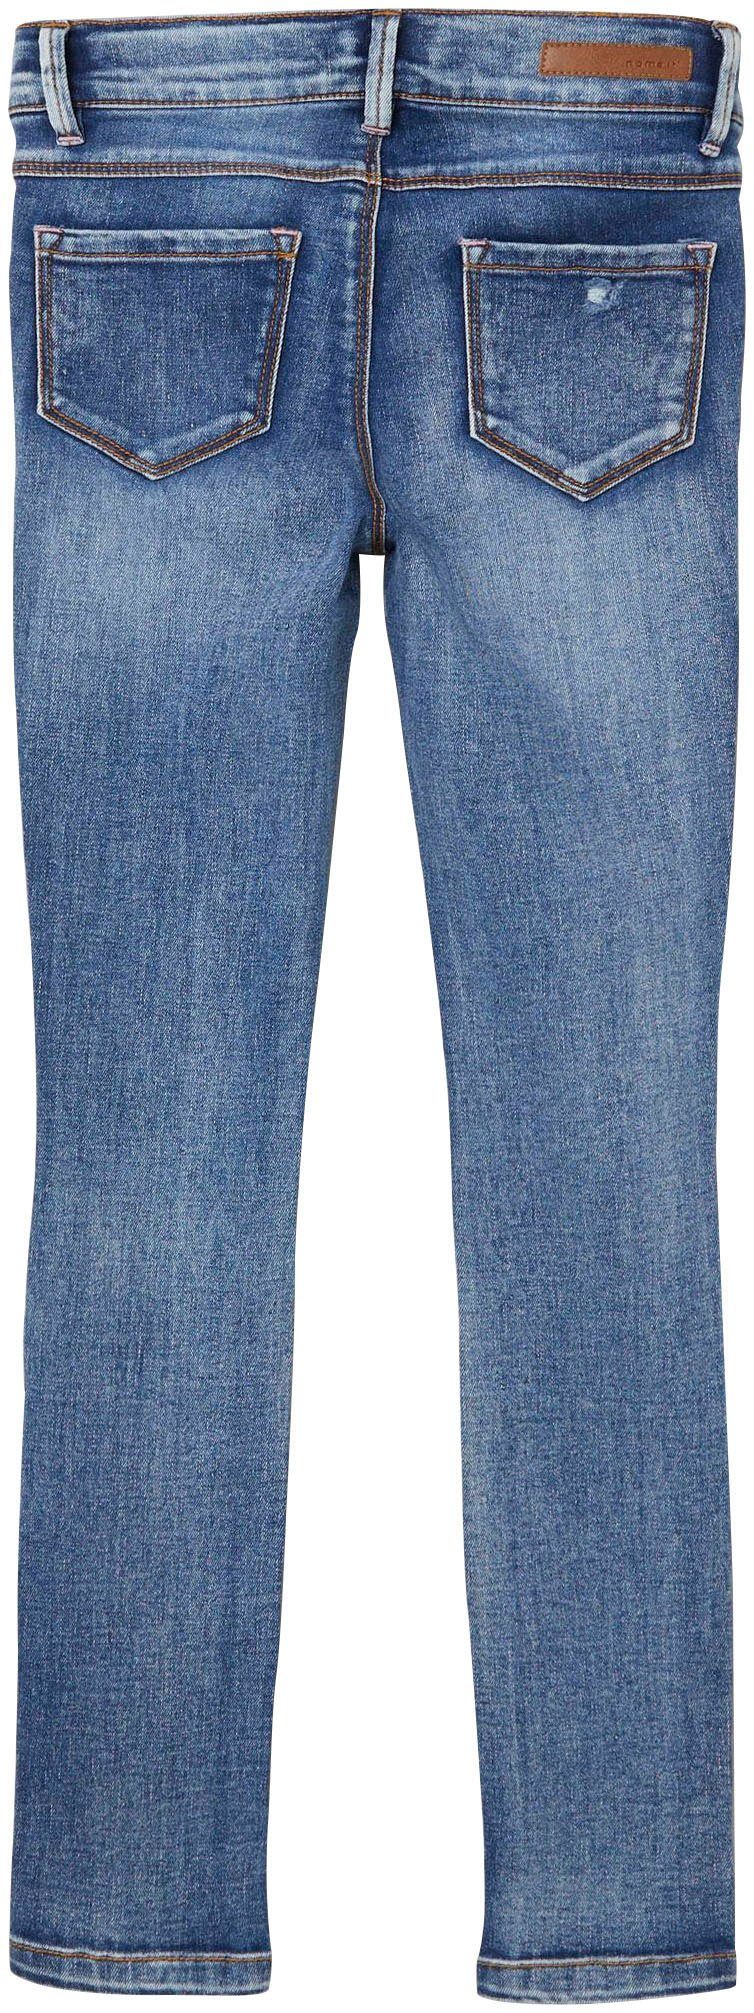 It DNMTONSON NKFPOLLY Stretch-Jeans PANT 2678 Name